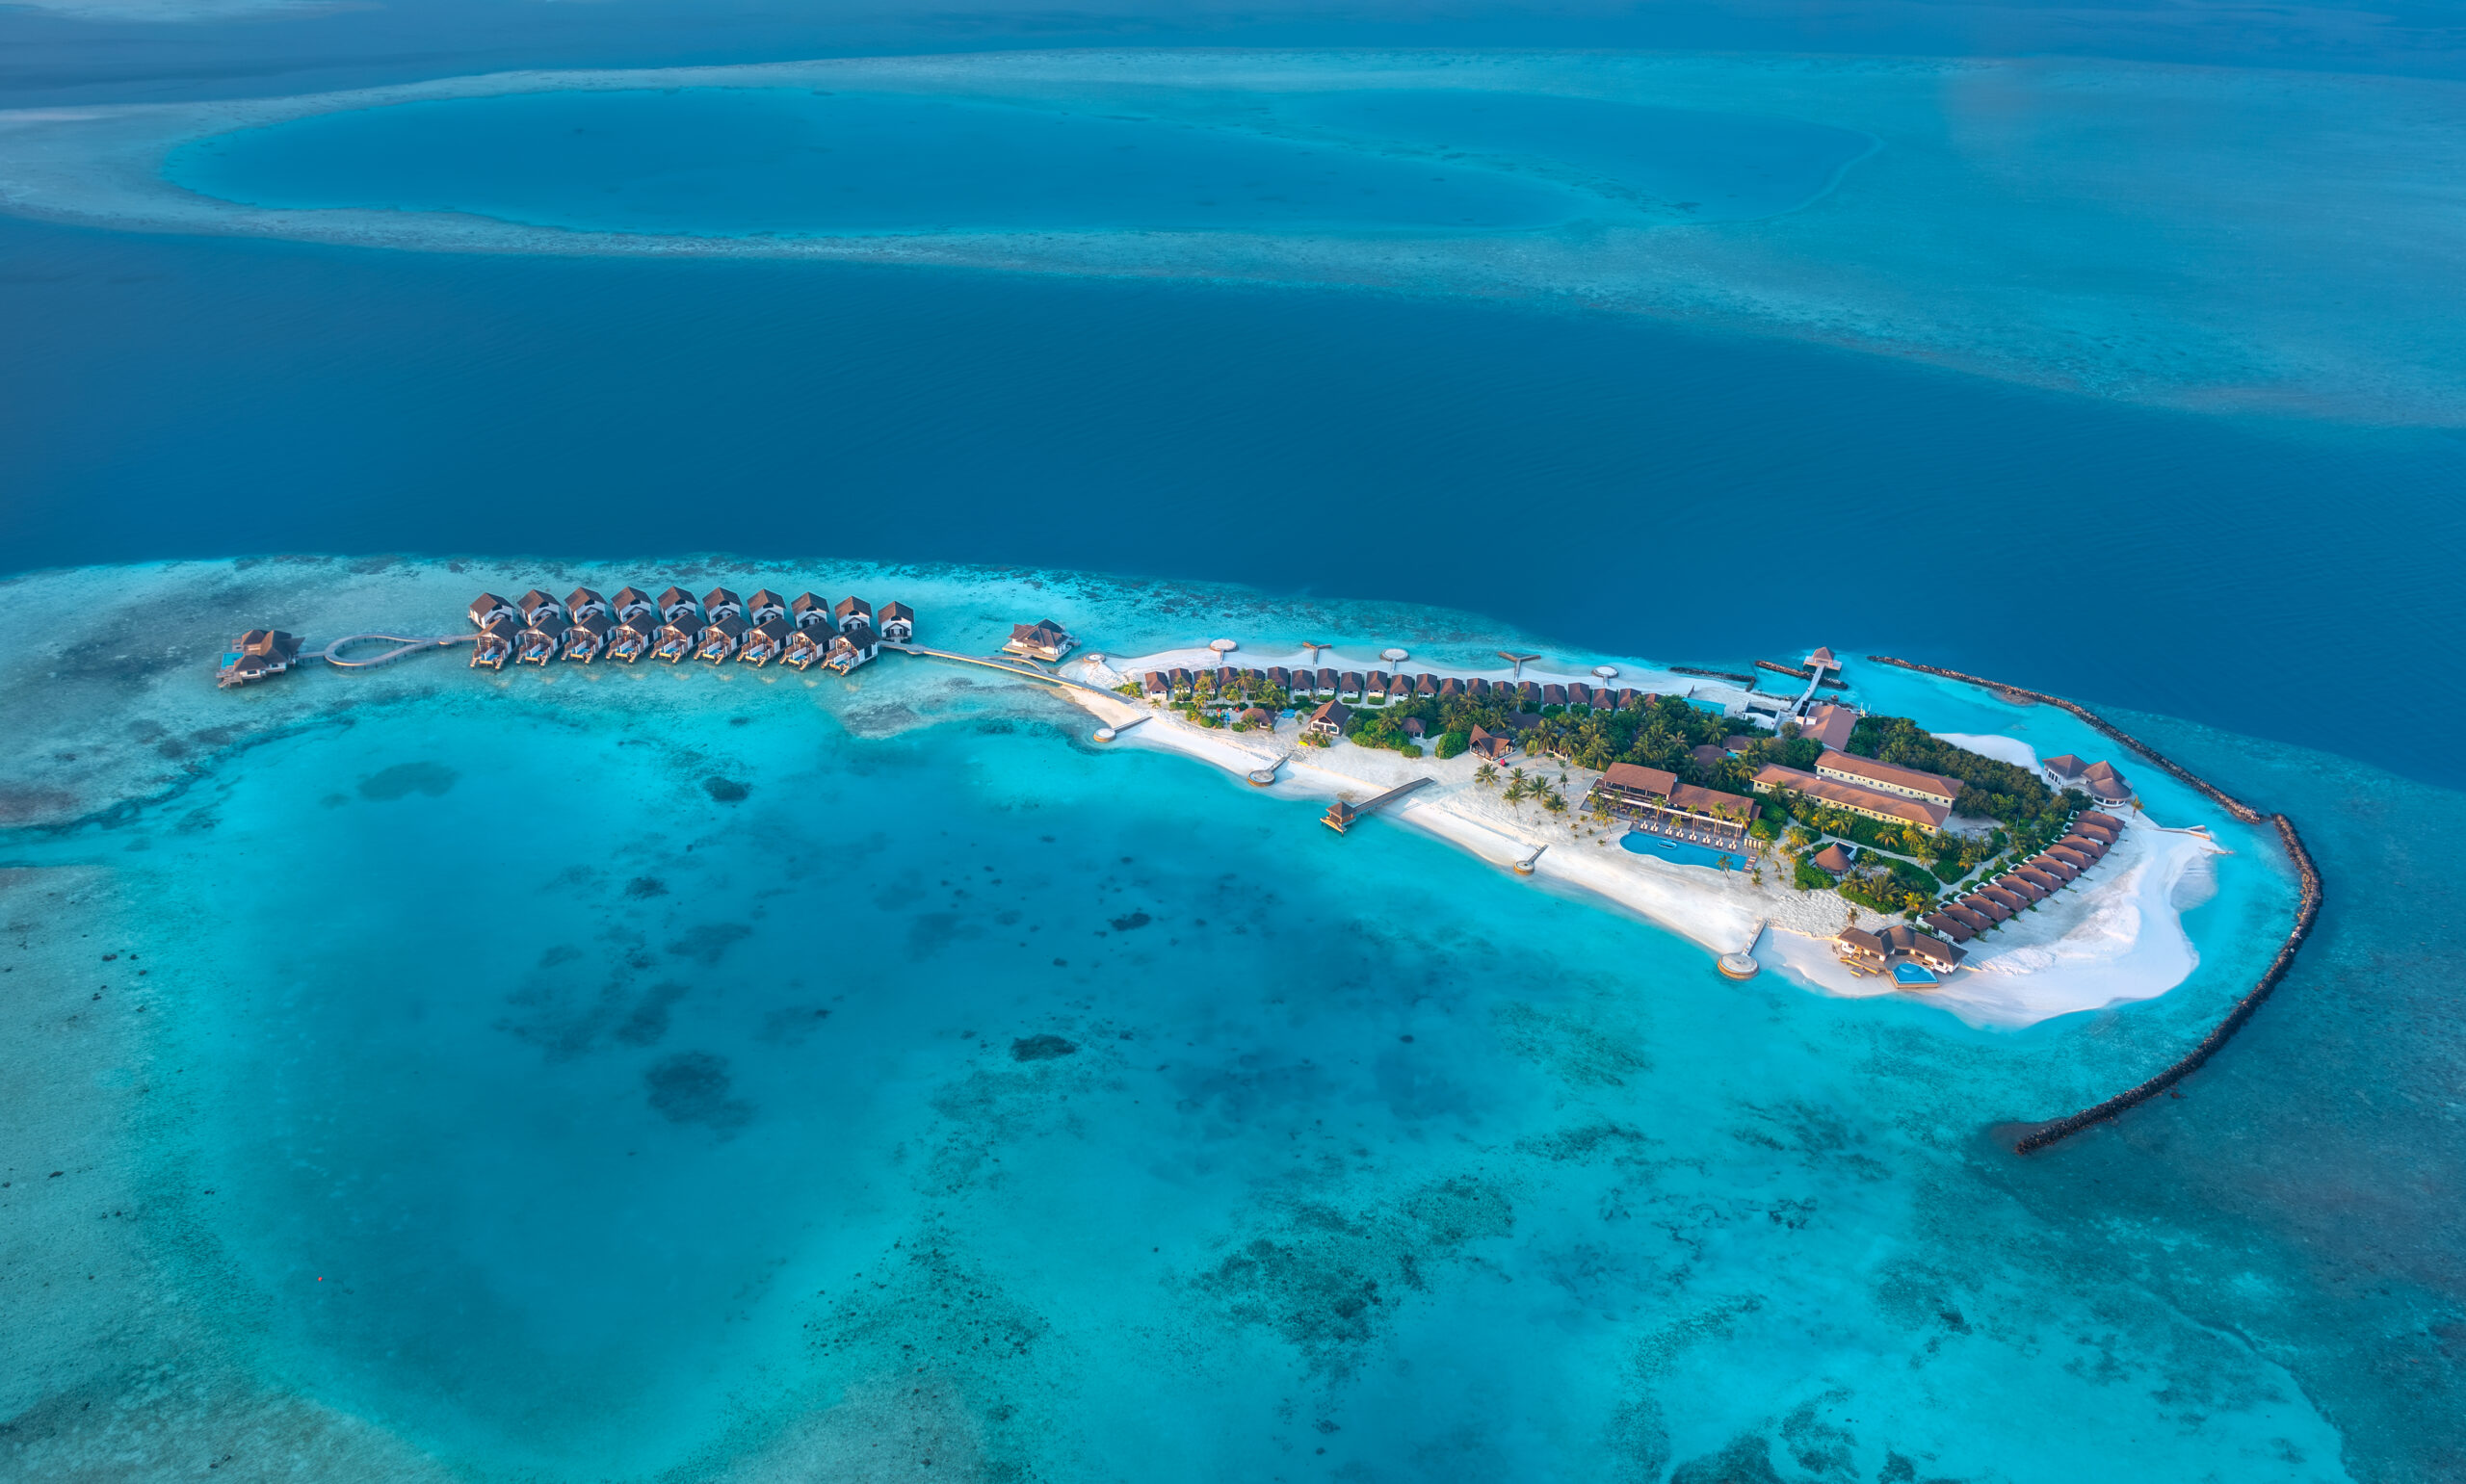 La Vie Hotels & Resorts launches NOOE lifestyle brand with new Maldives resort